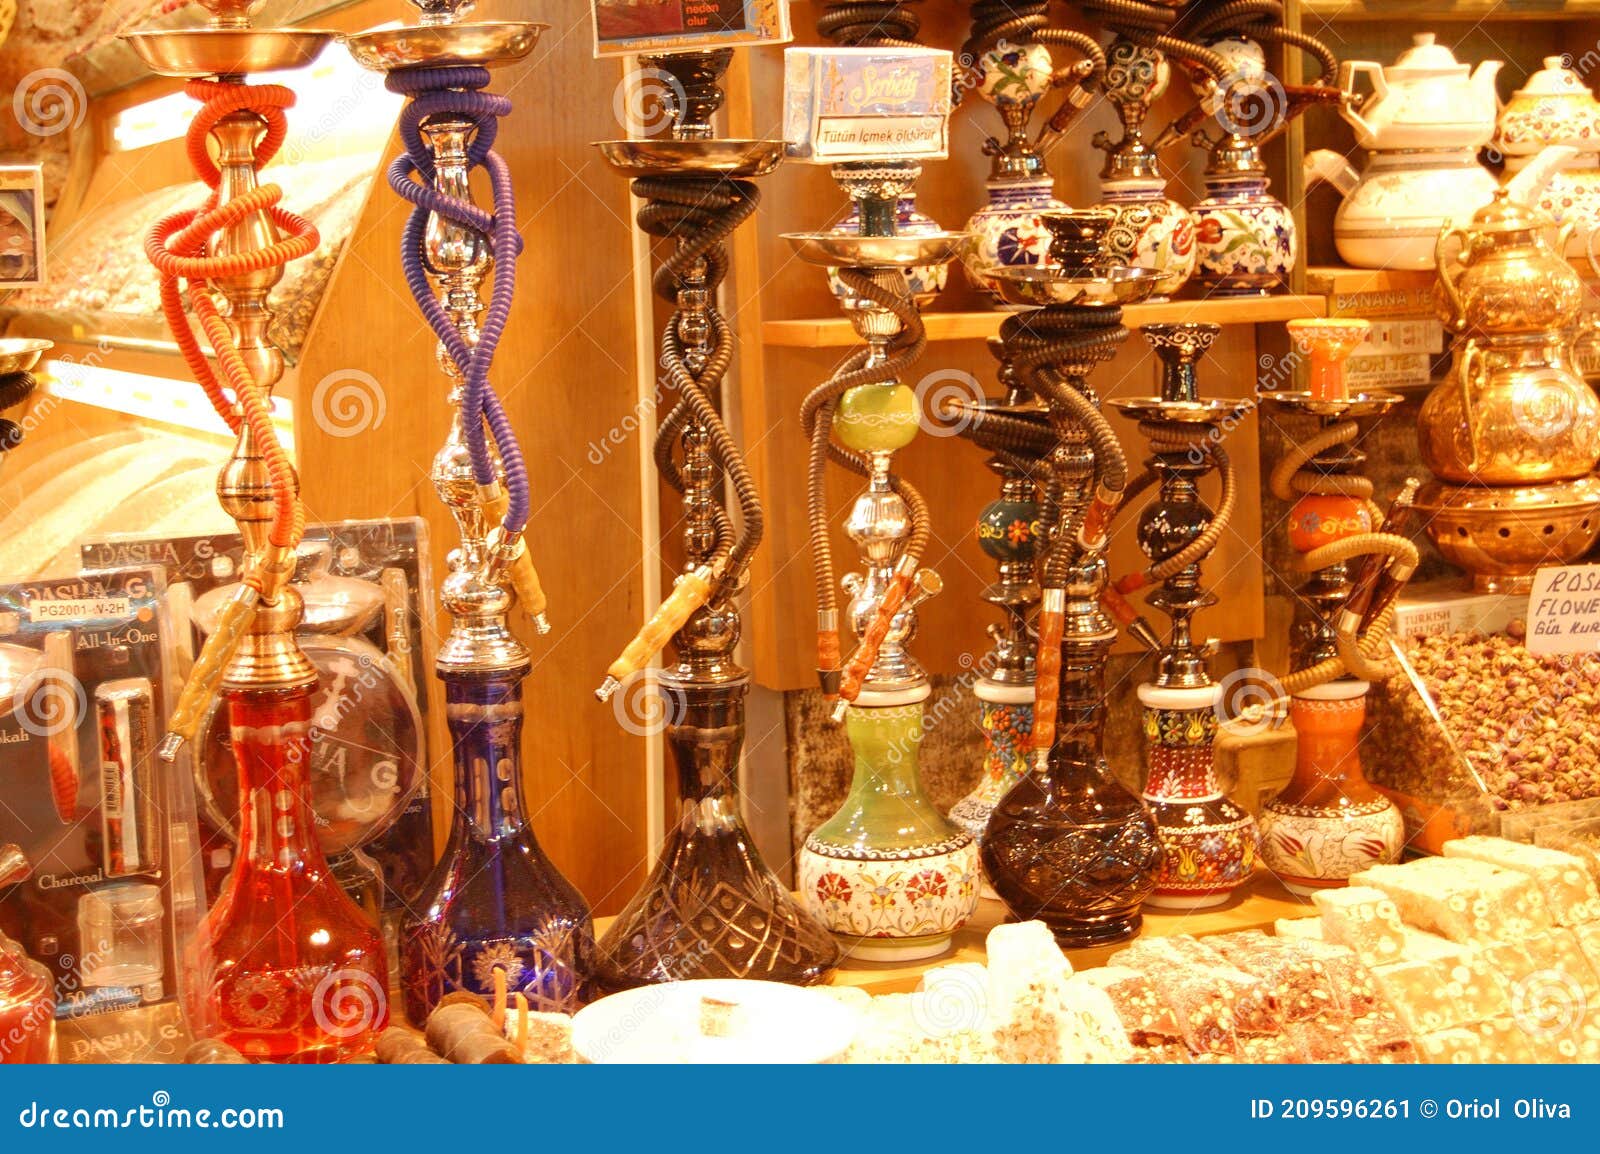 view of the shops of different products in the grand bazaar, in istanbul turkey